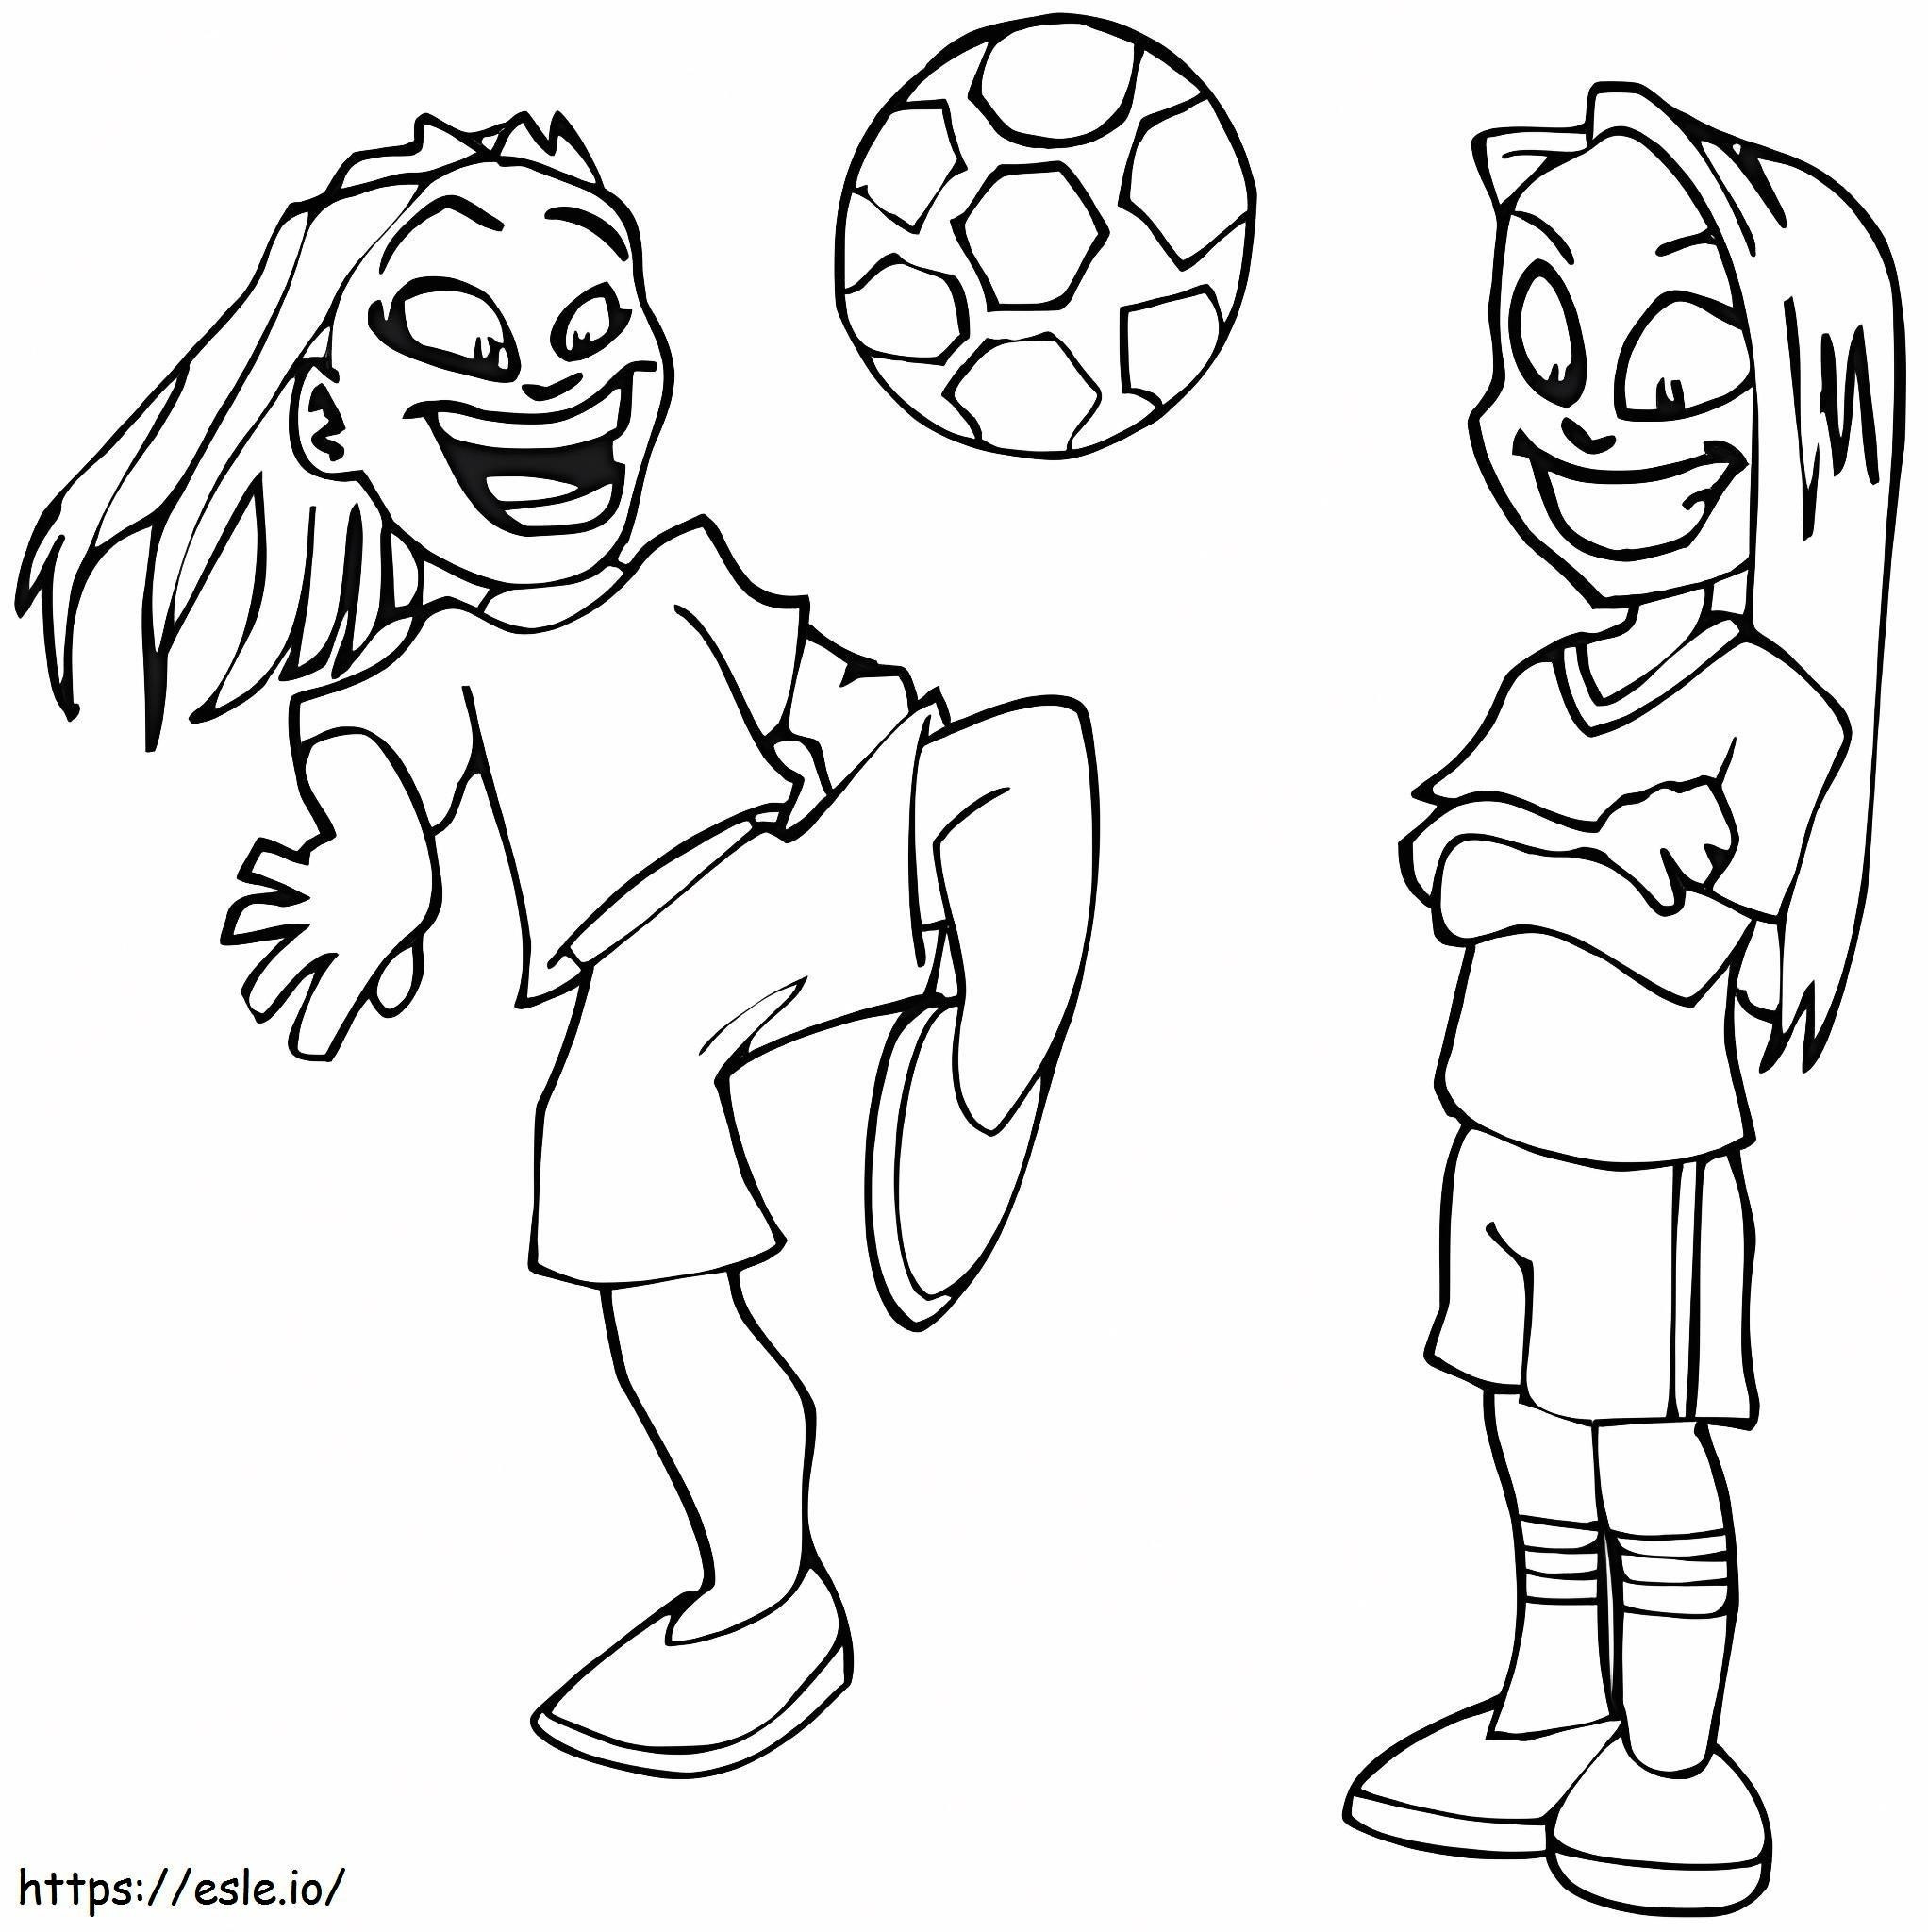 Two Girls Playing Soccer coloring page